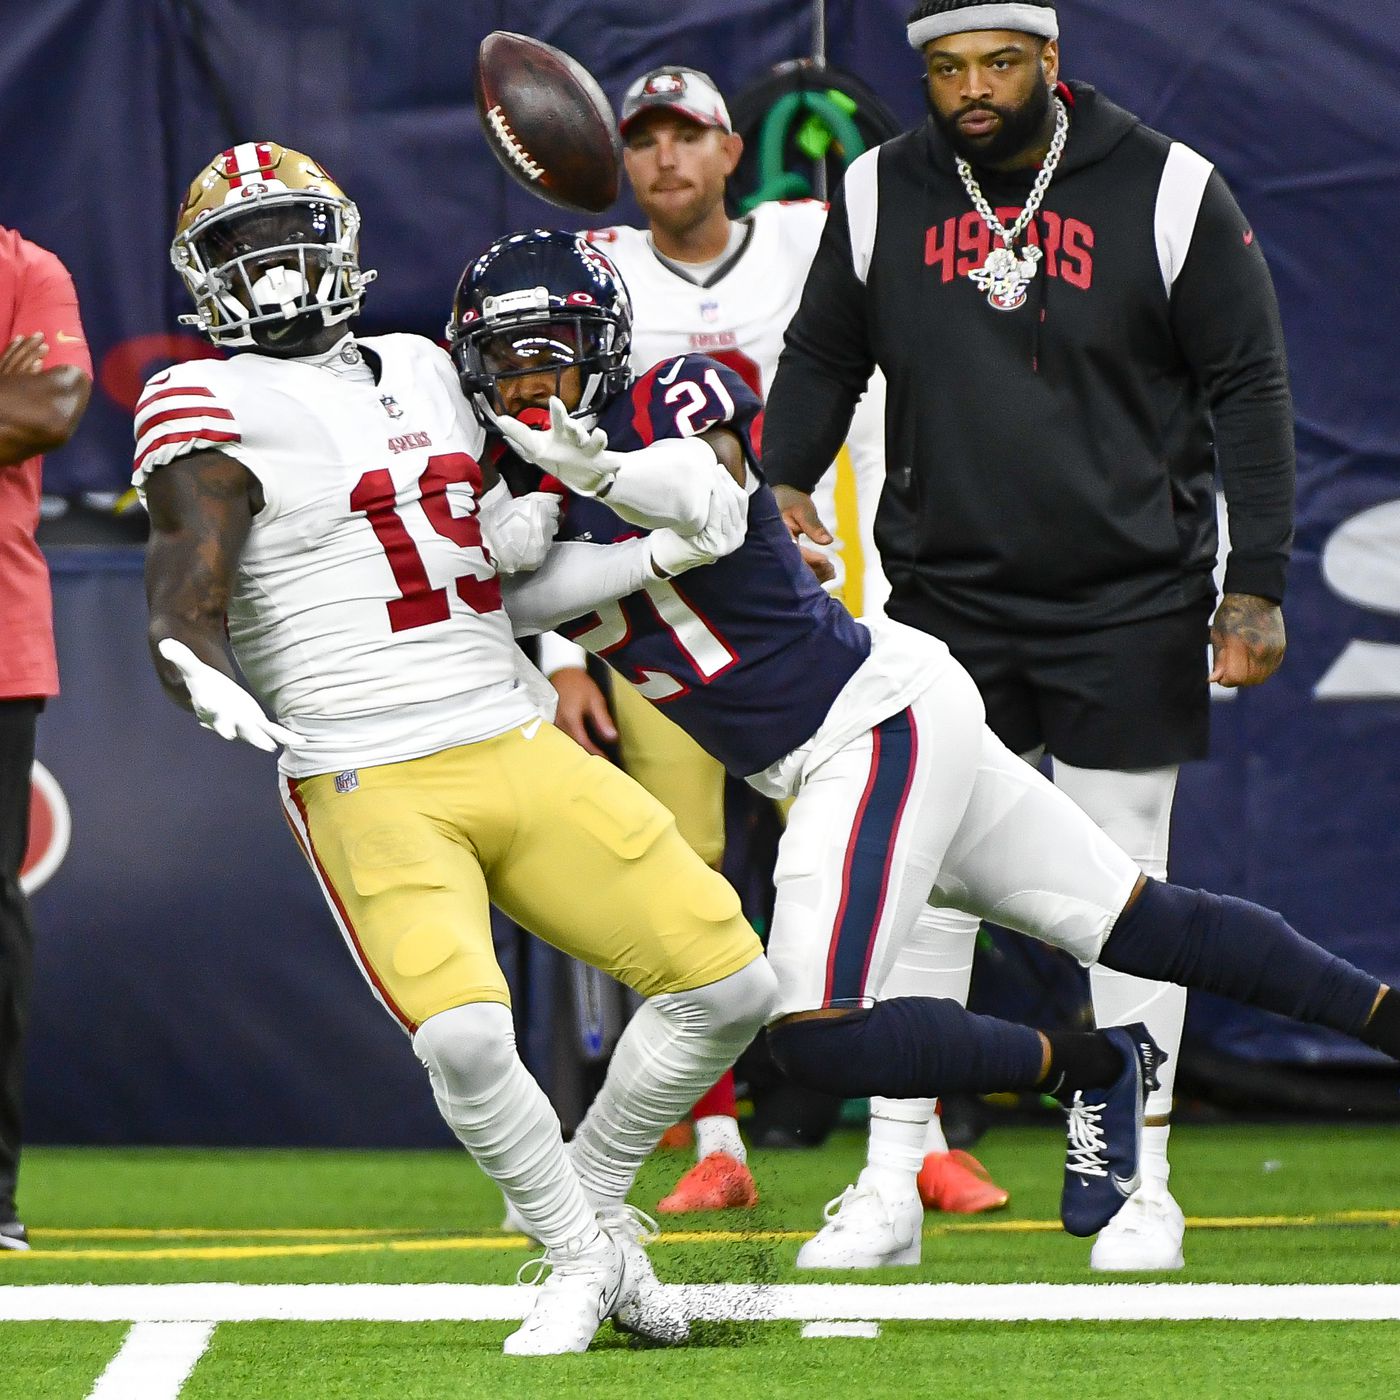 49ers injury update: Deebo Samuel day-to-day with knee issue